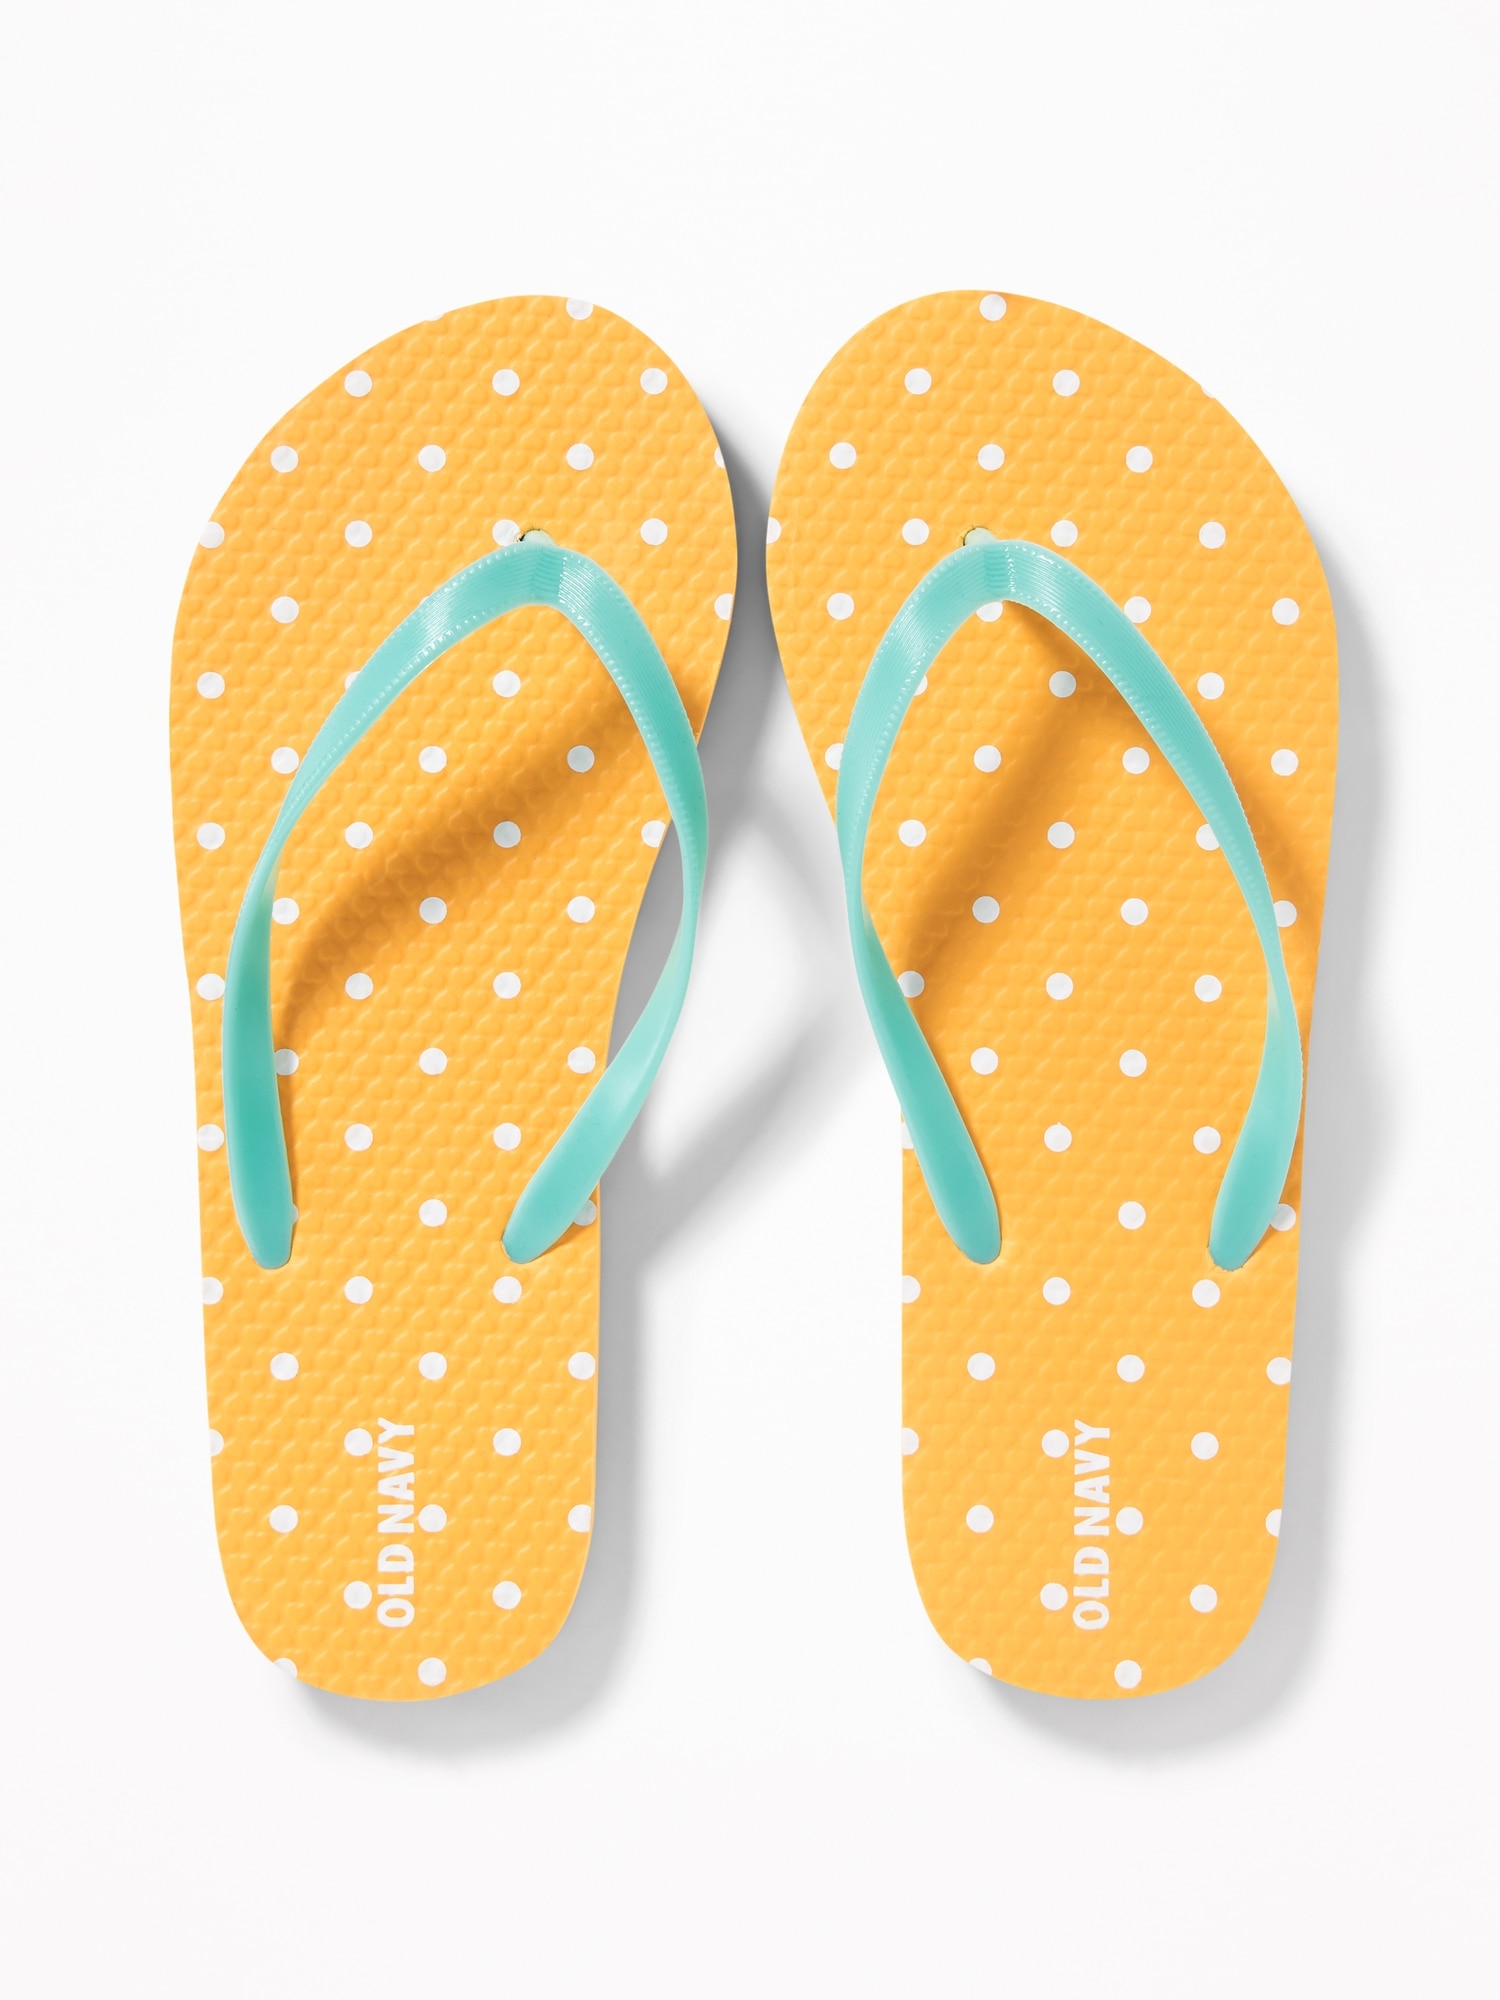 Old Navy's Famous $1 Flip-Flop Sale Has Been Announced—But With A New ...